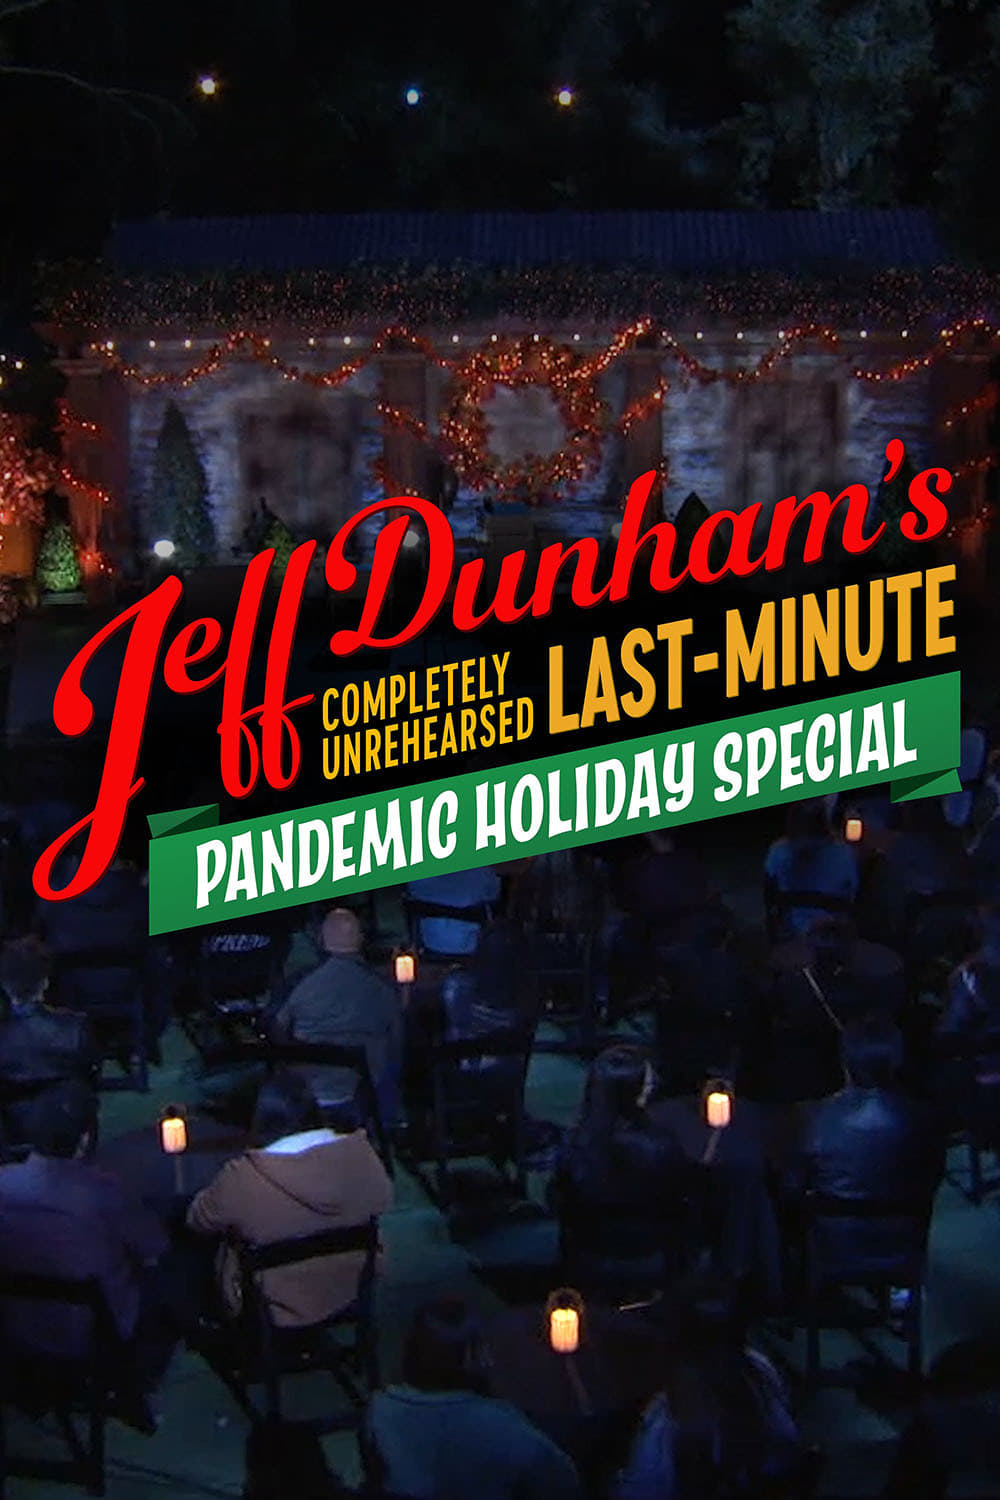 Jeff Dunham's Completely Unrehearsed Last-Minute Pandemic Holiday Special (2020)